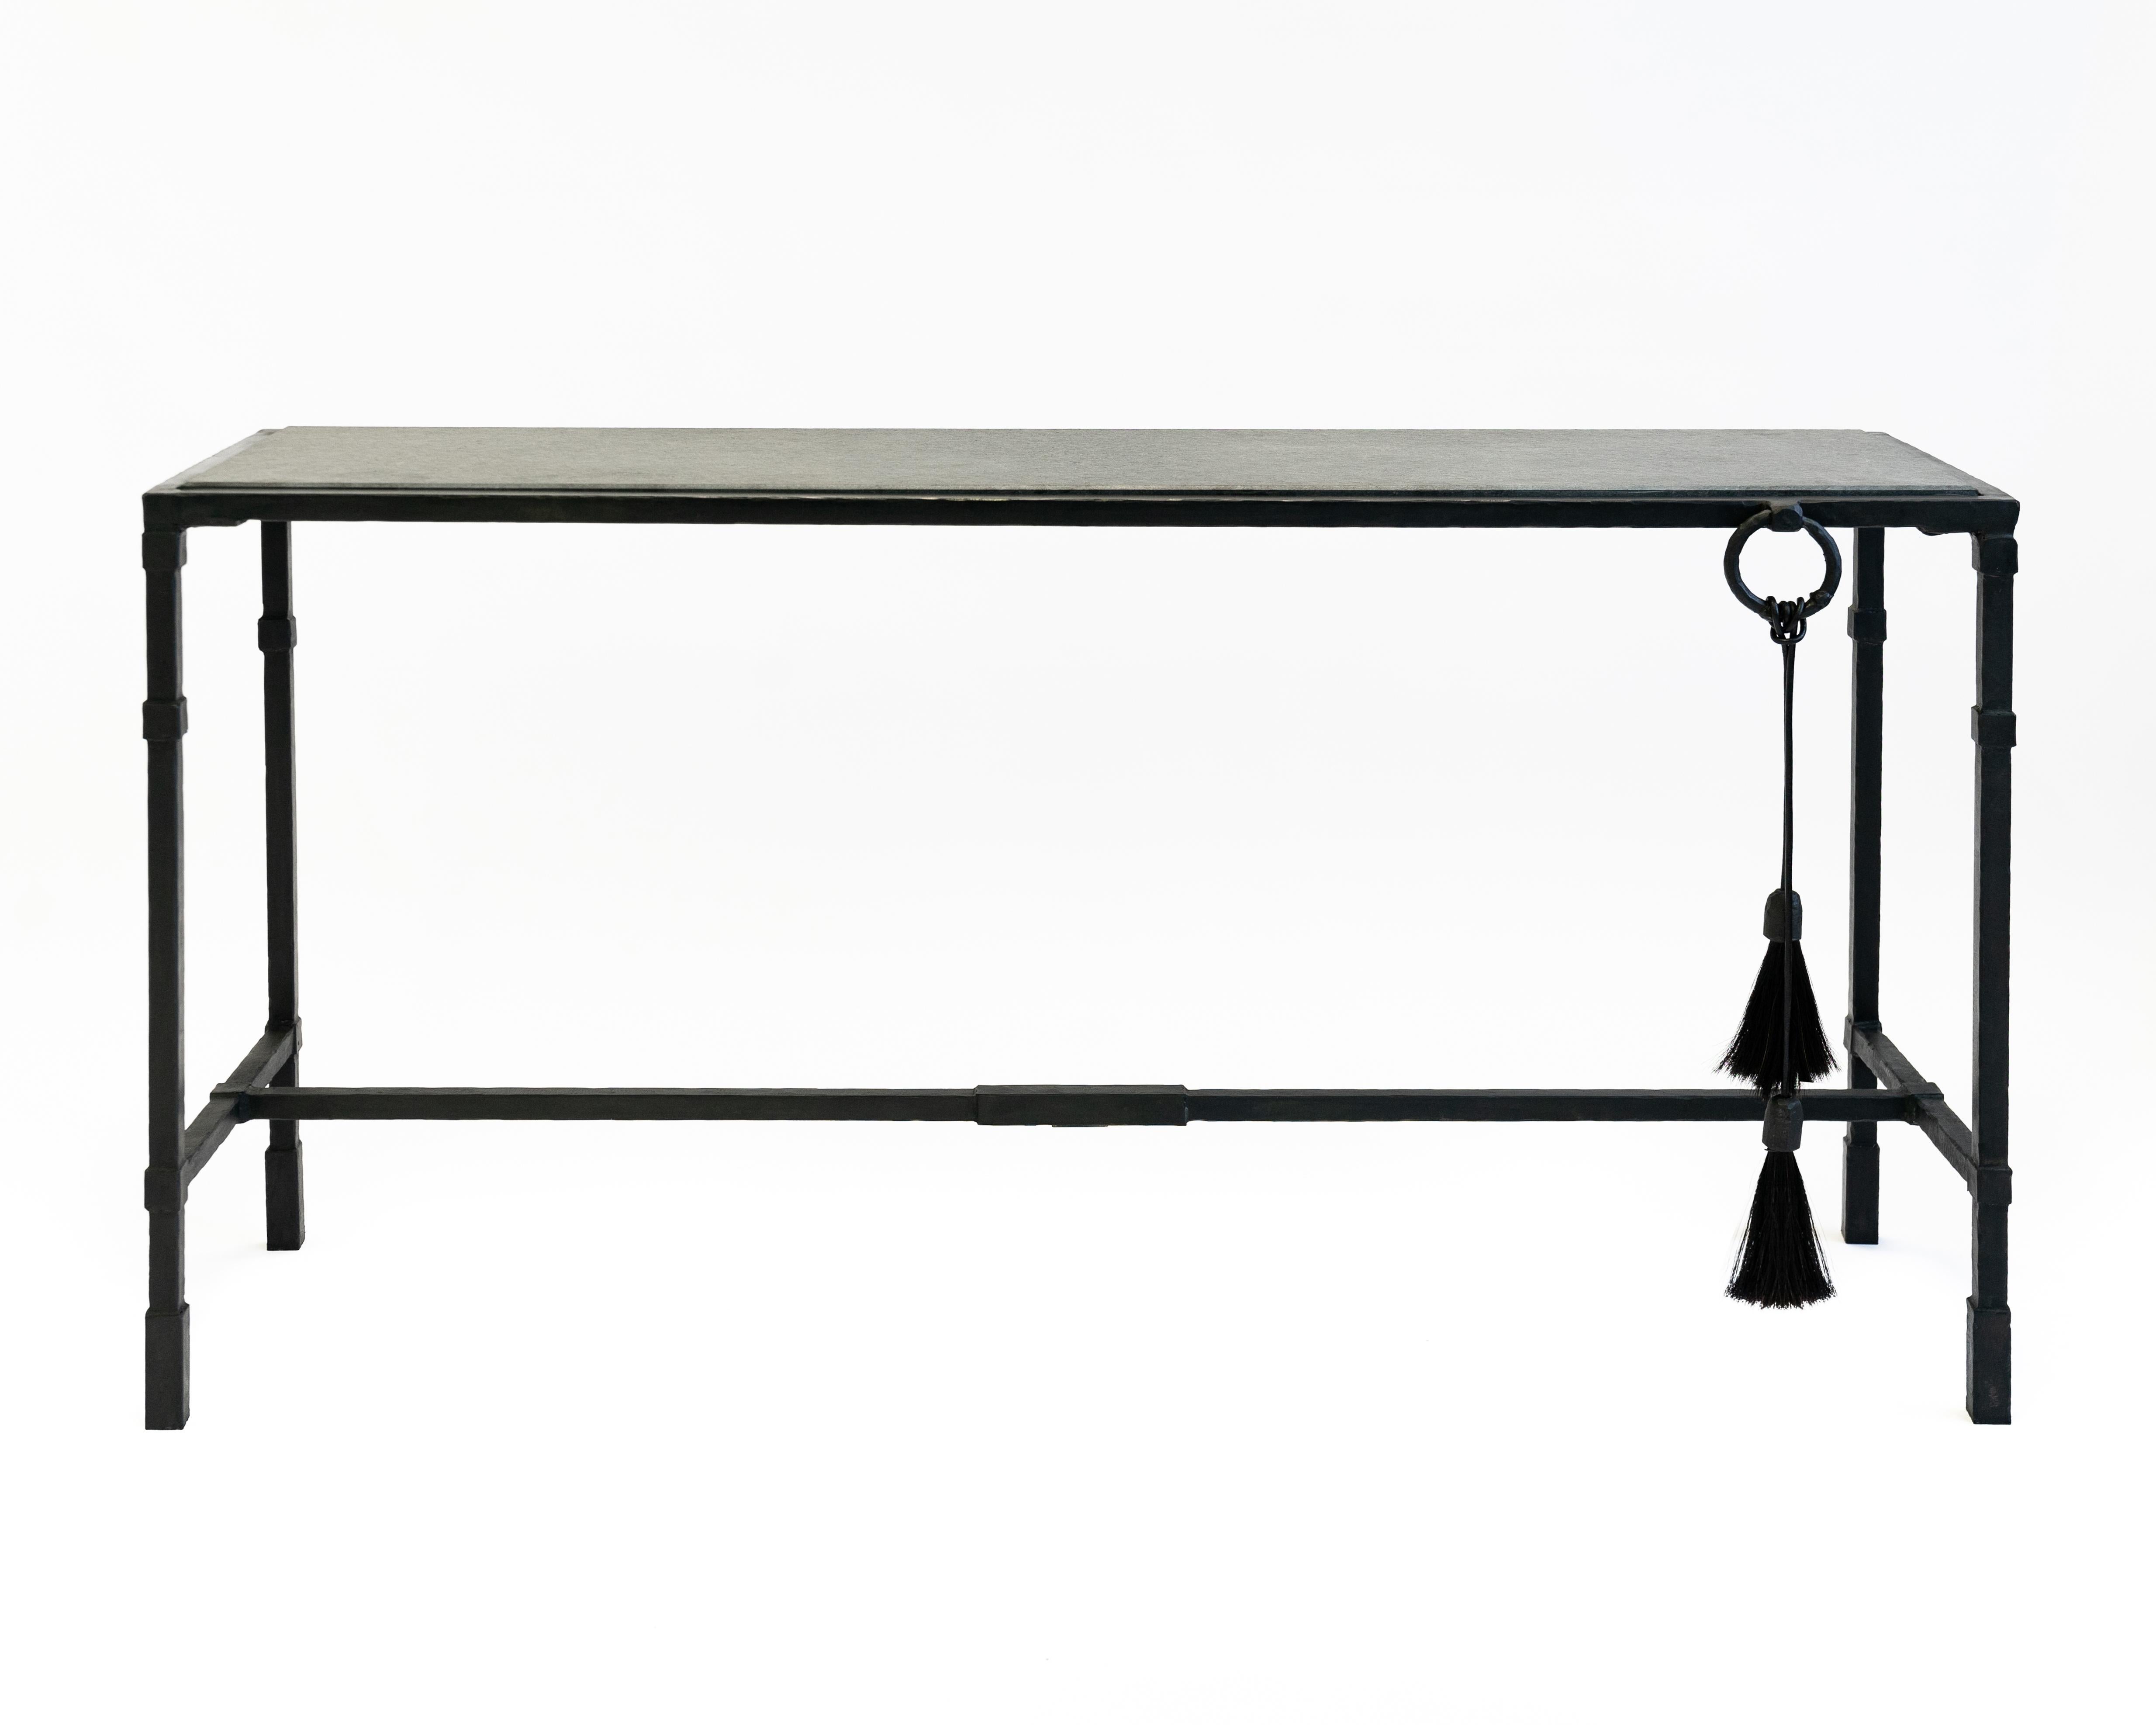 Console No. 3 by JM Szymanski
Materials: Blackened steel and waxed finish
Dimensions: 48” L x 18” W x 33” H 

A beautiful piece of absolute black granite placed into a hand-carved blacked steel frame with a horsehair accent.

Jake Szymanski lives